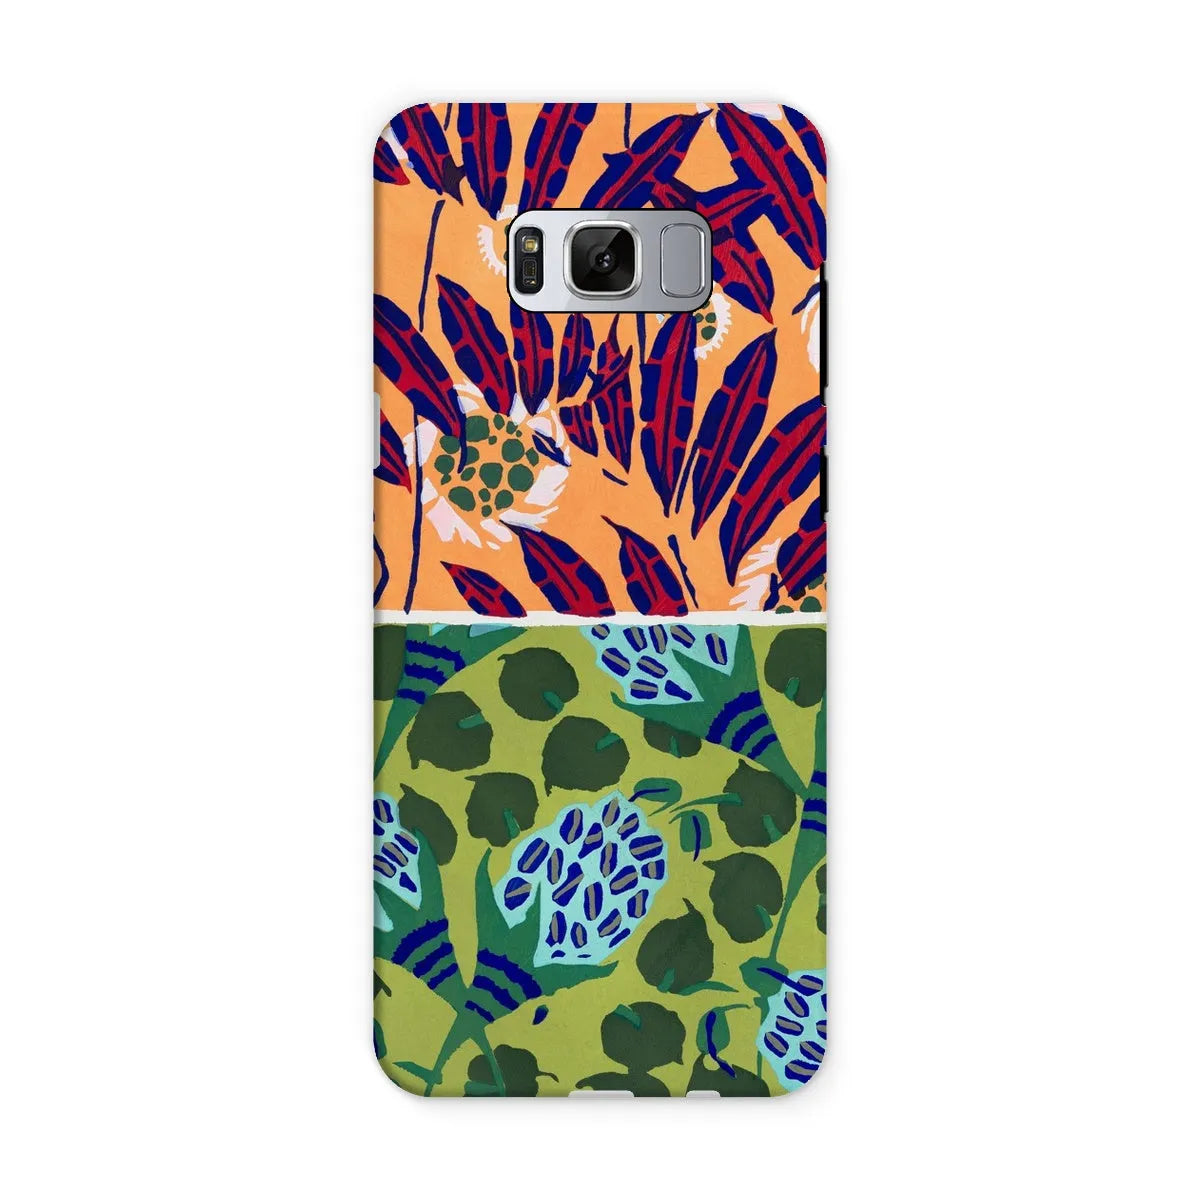 Fabric & Rugs Too - Pochoir Pattern Phone Case - E. A. Séguy - Samsung Galaxy S8 / Matte - Mobile Phone Cases